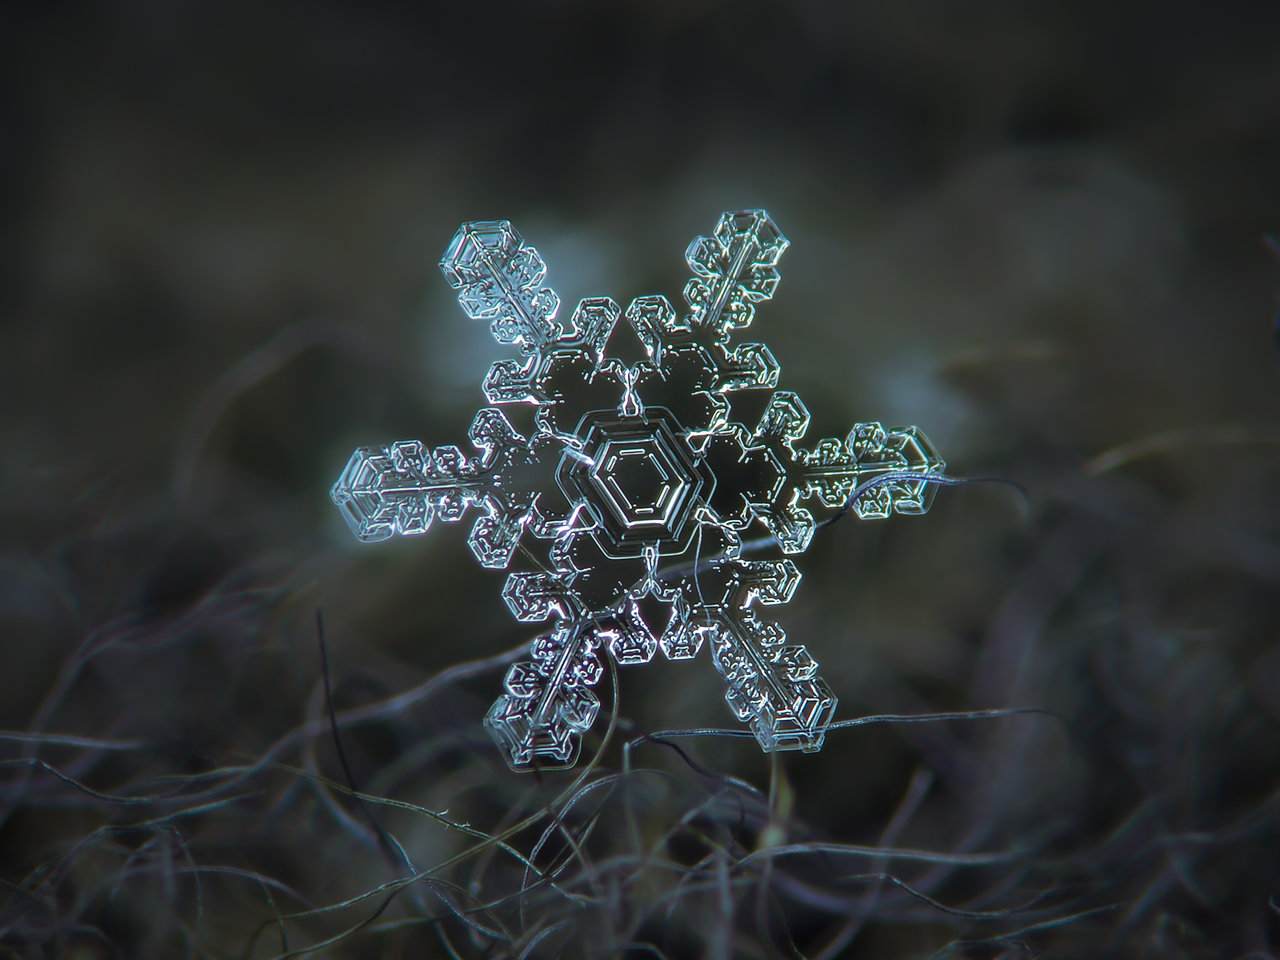 General 1280x960 field detailed snowflakes